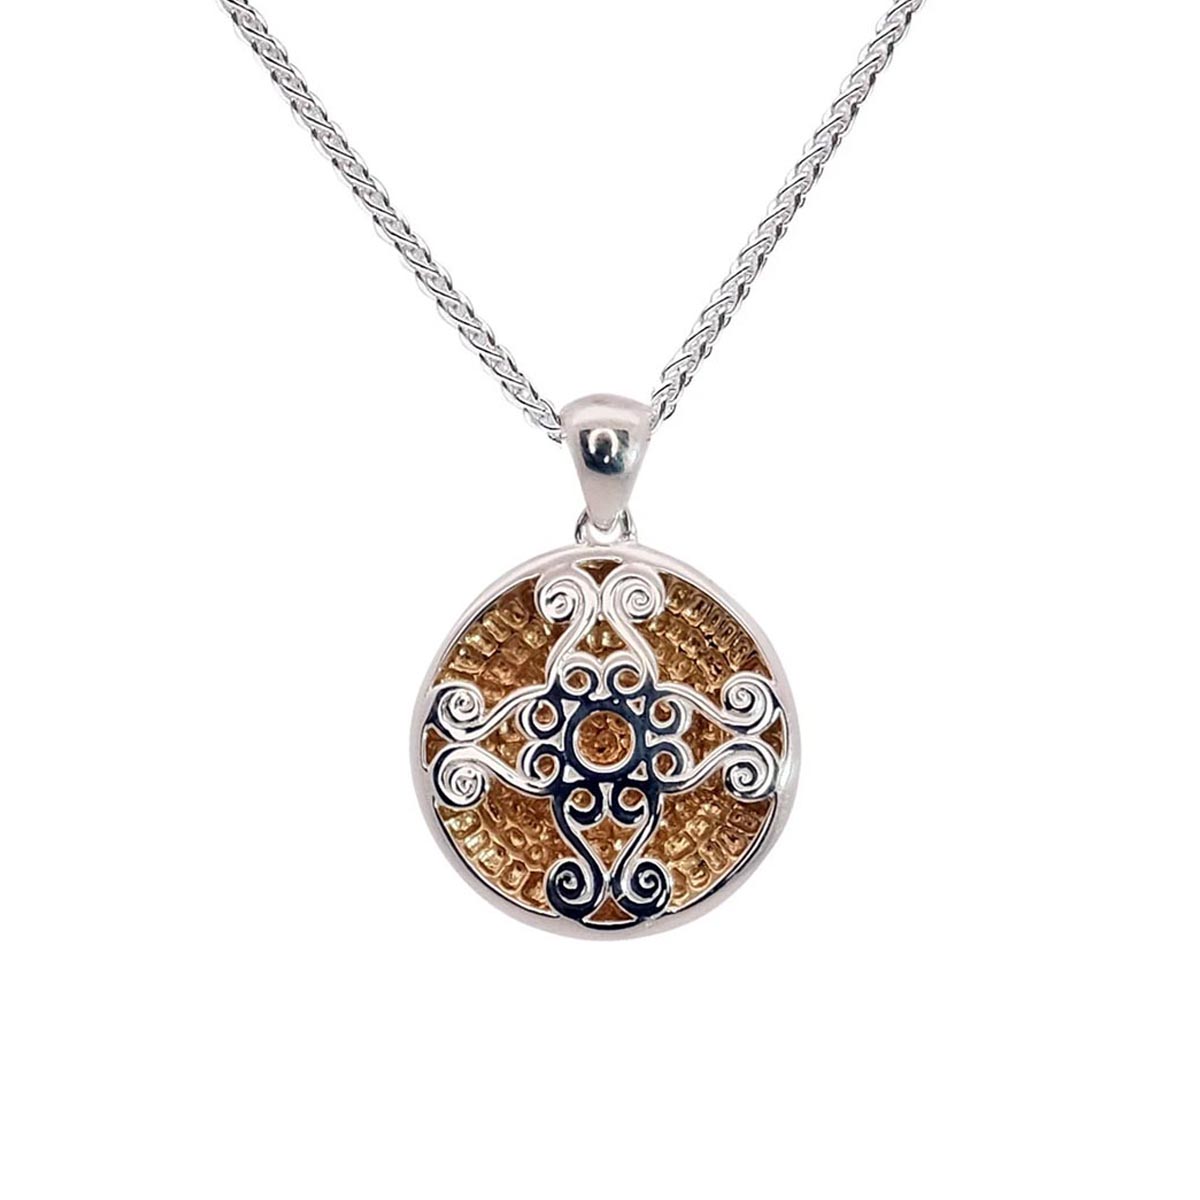 Keith Jack Celestial Necklace in Sterling Silver and 14kt Yellow Gold Plate